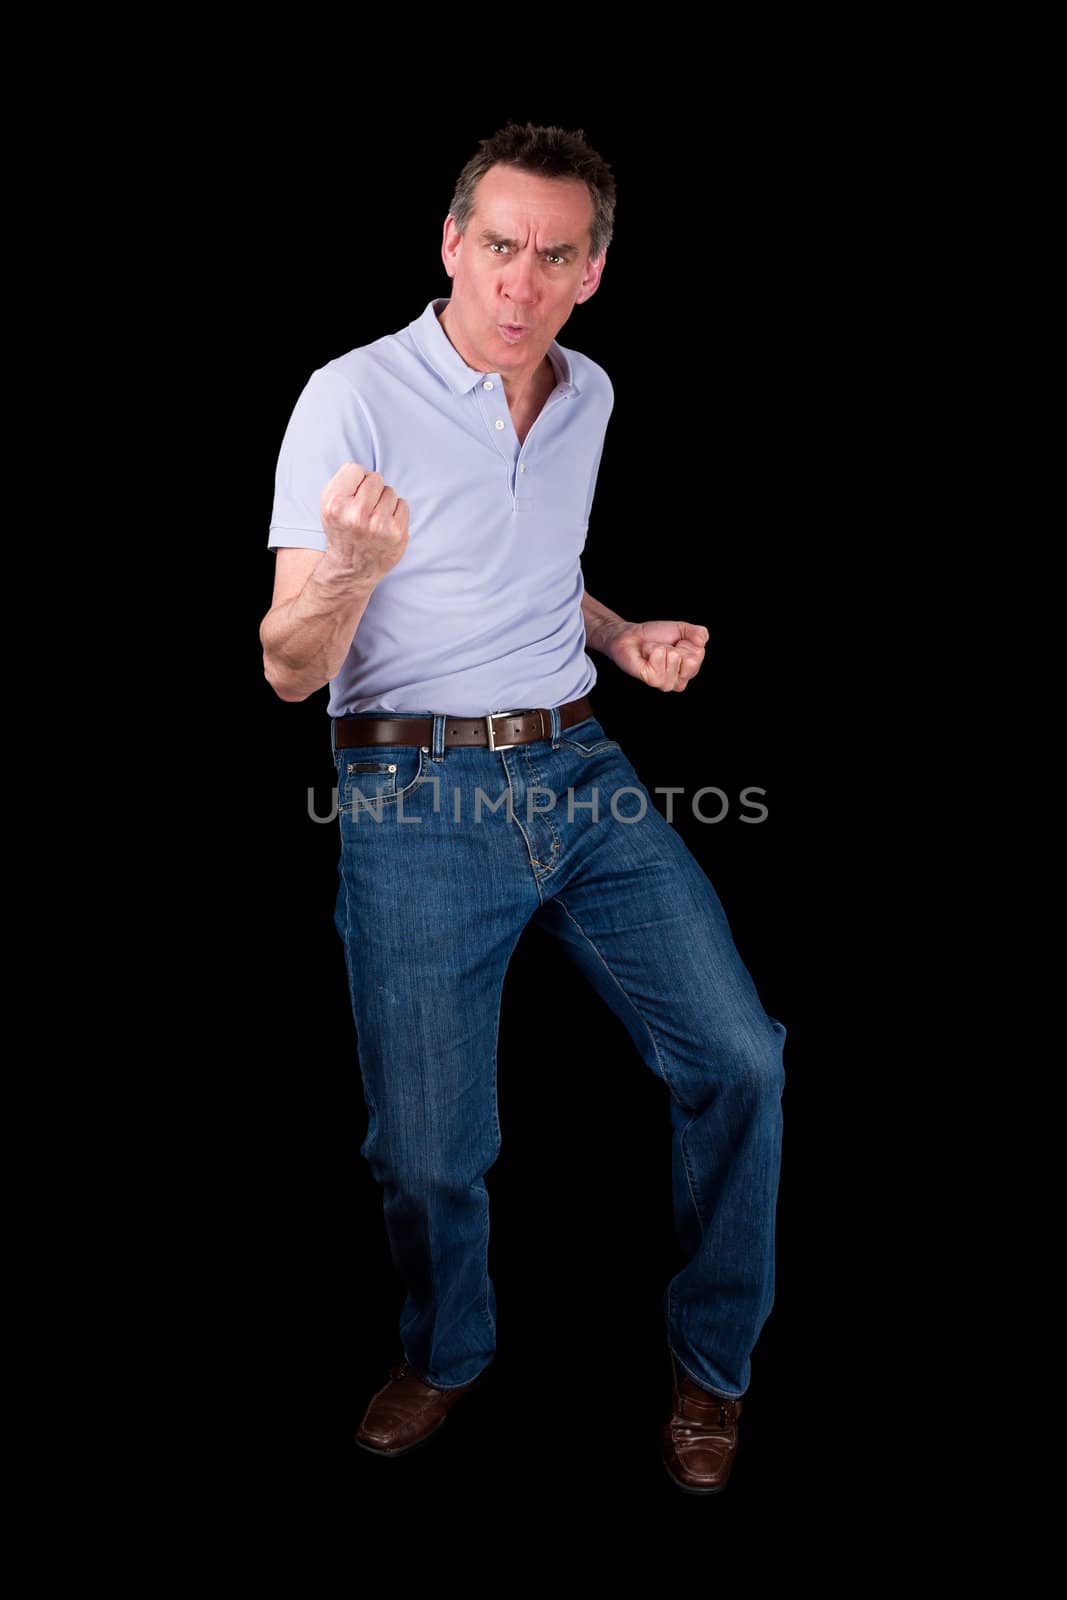 Middle Age Man Doing Funny Dance Pose Black Background